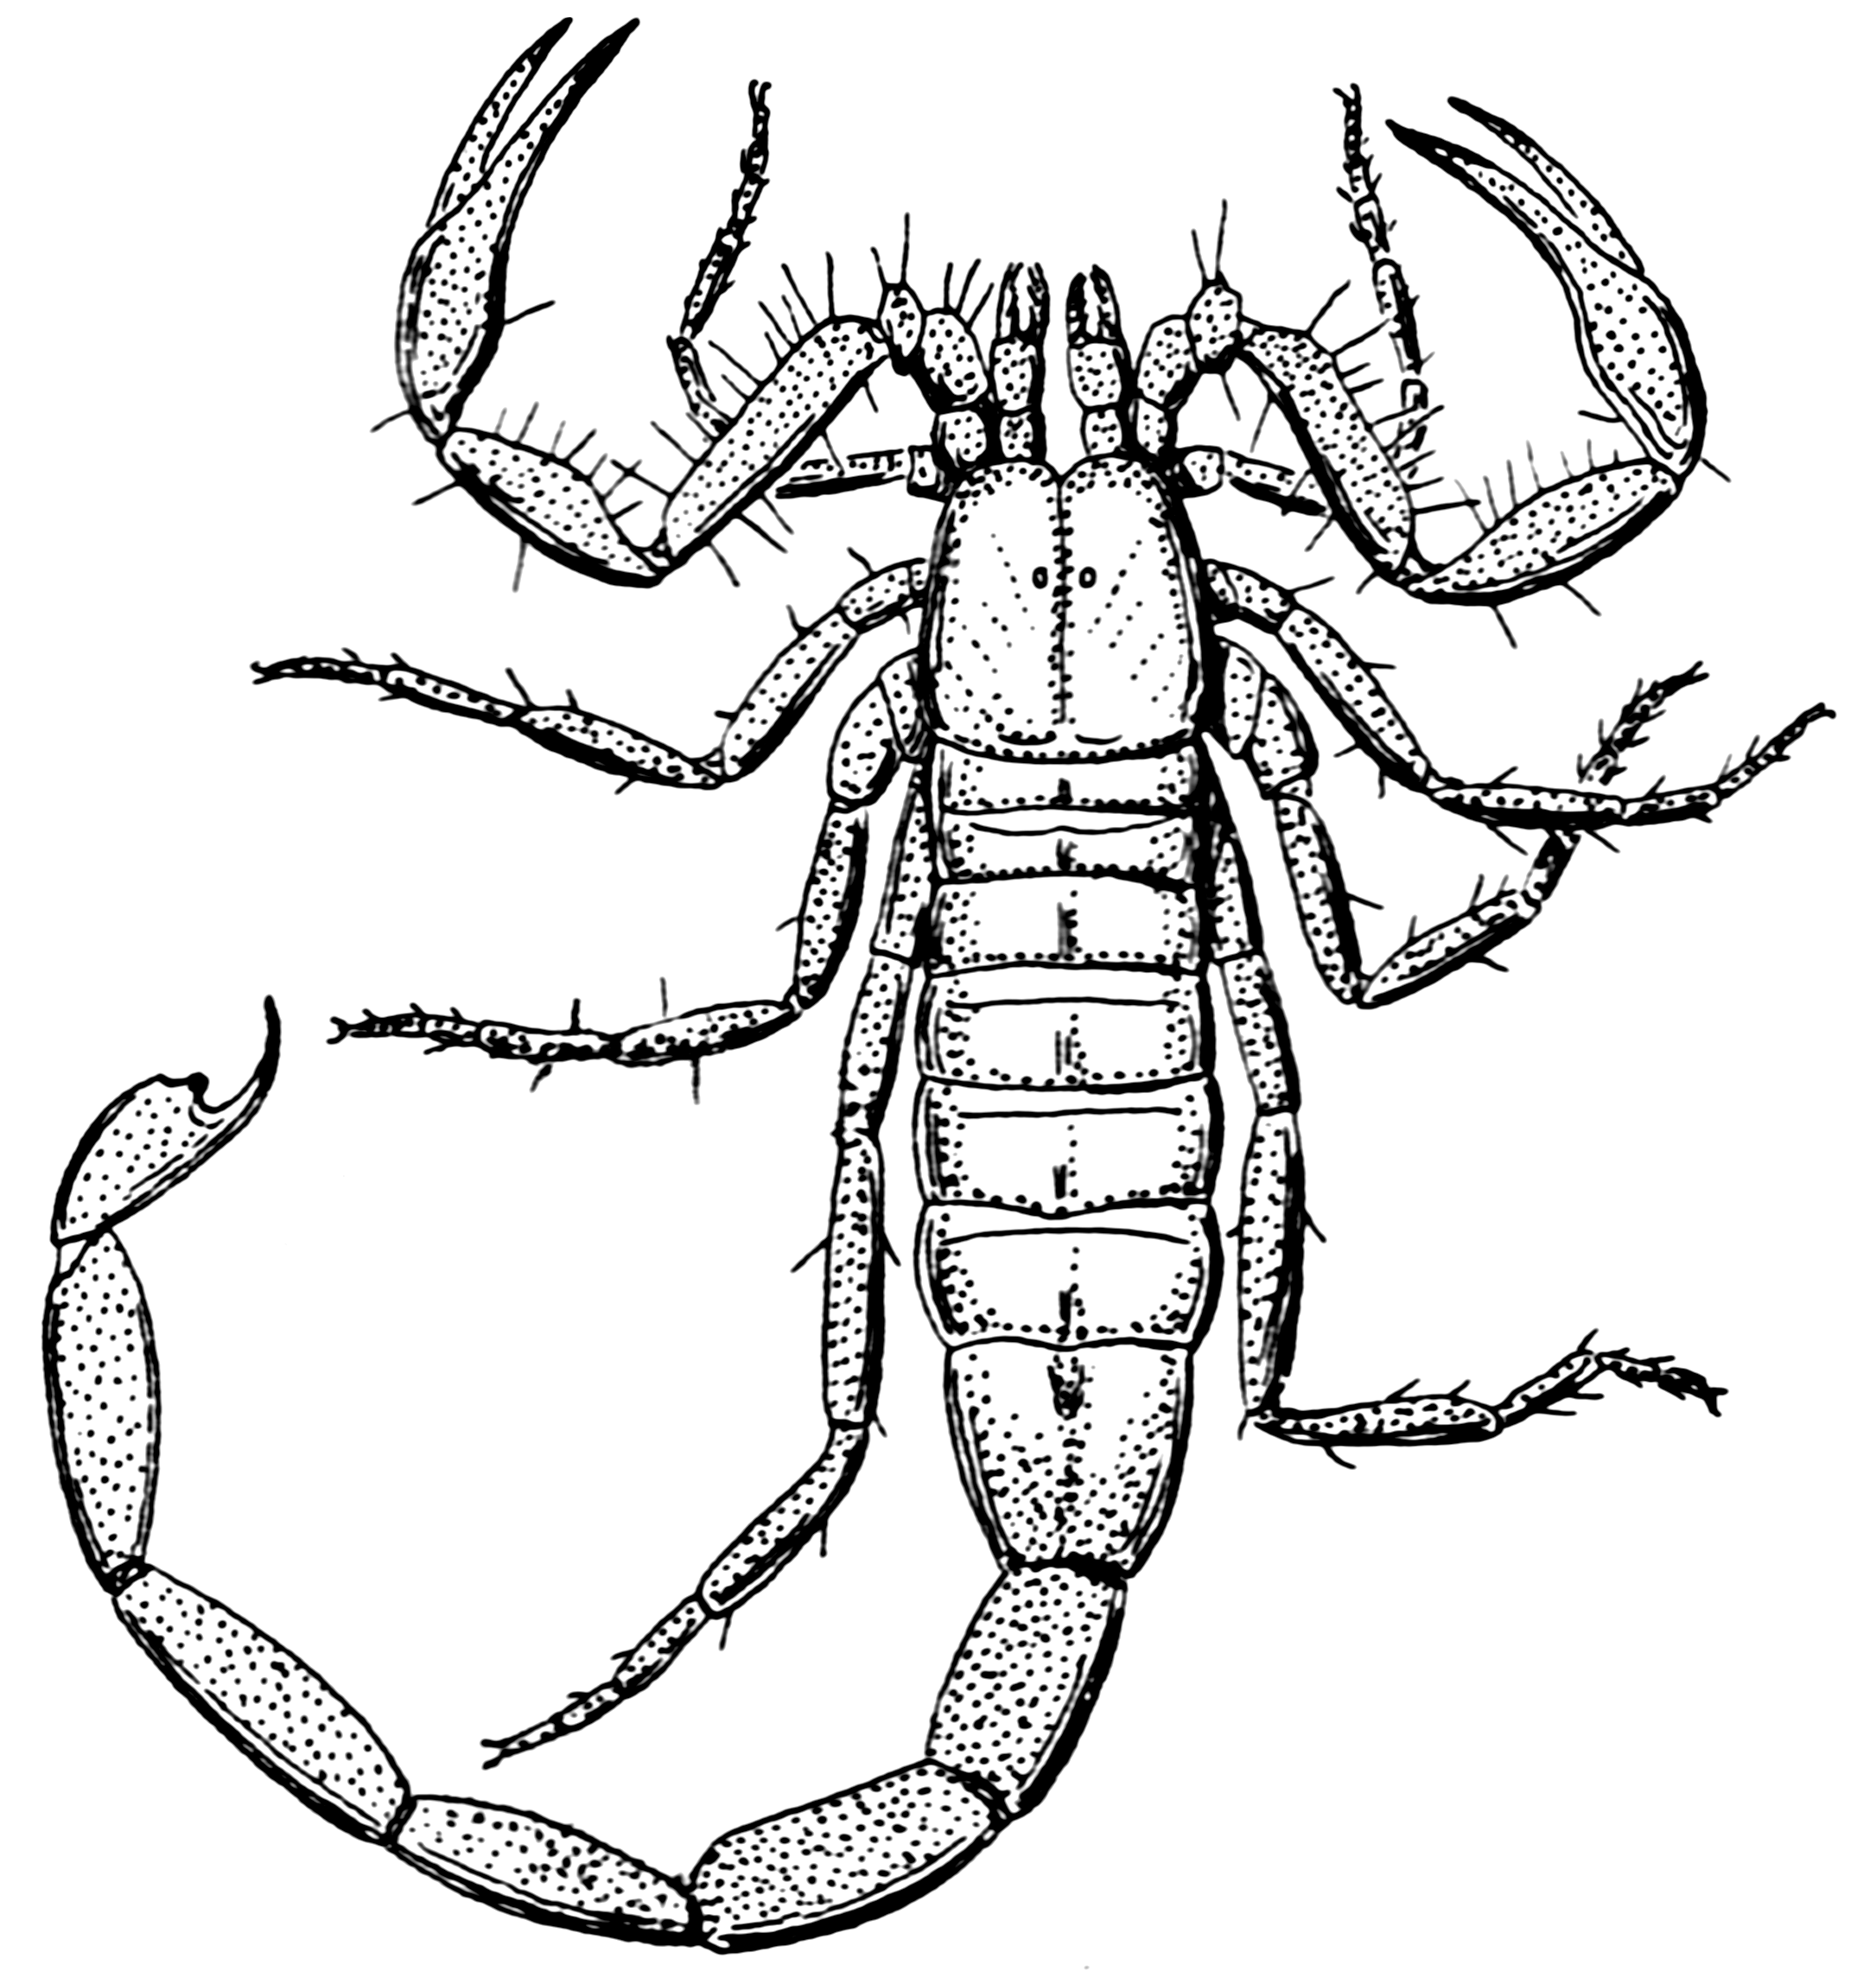 Scorpion (PSF).png